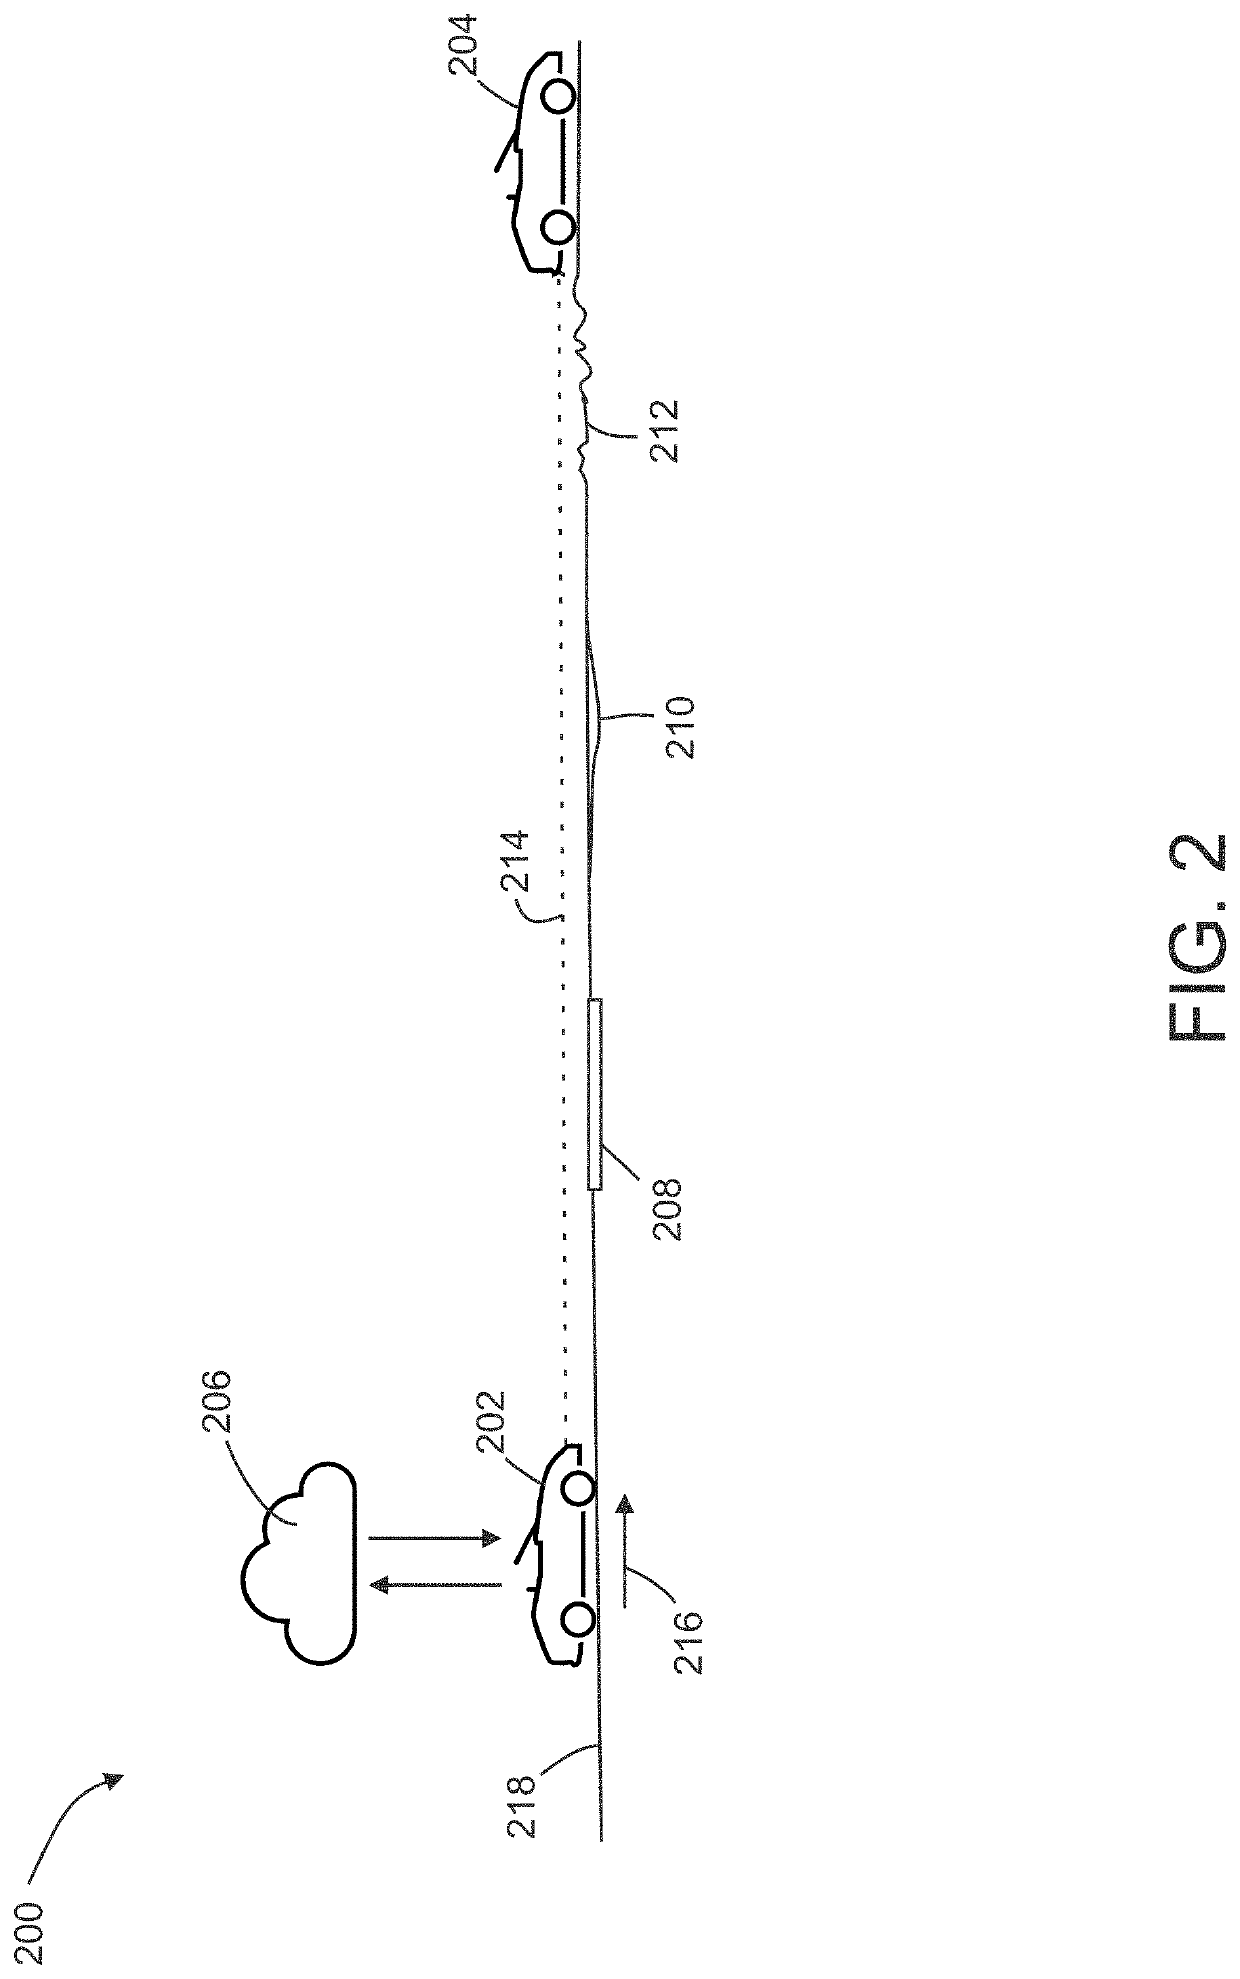 Systems and methods for vehicle control using terrain-based localization